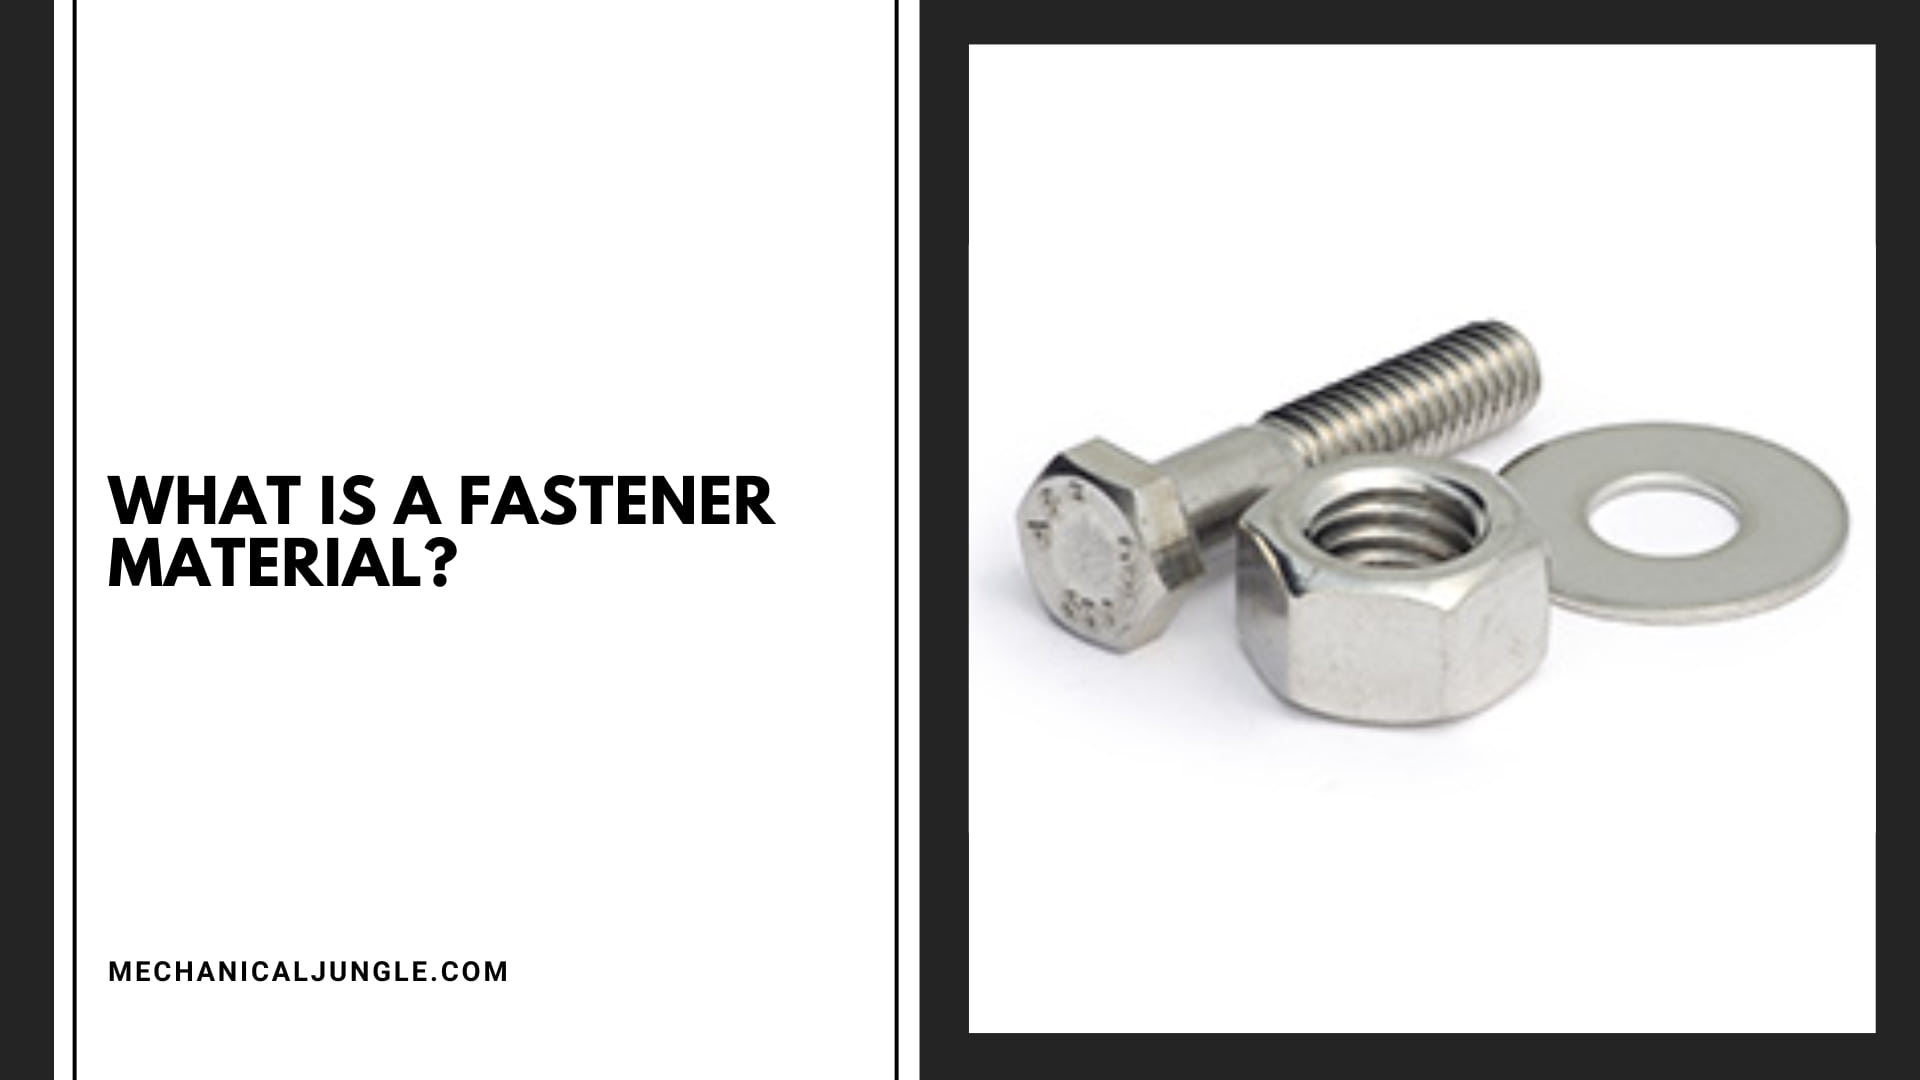 What Is a Fastener Material?